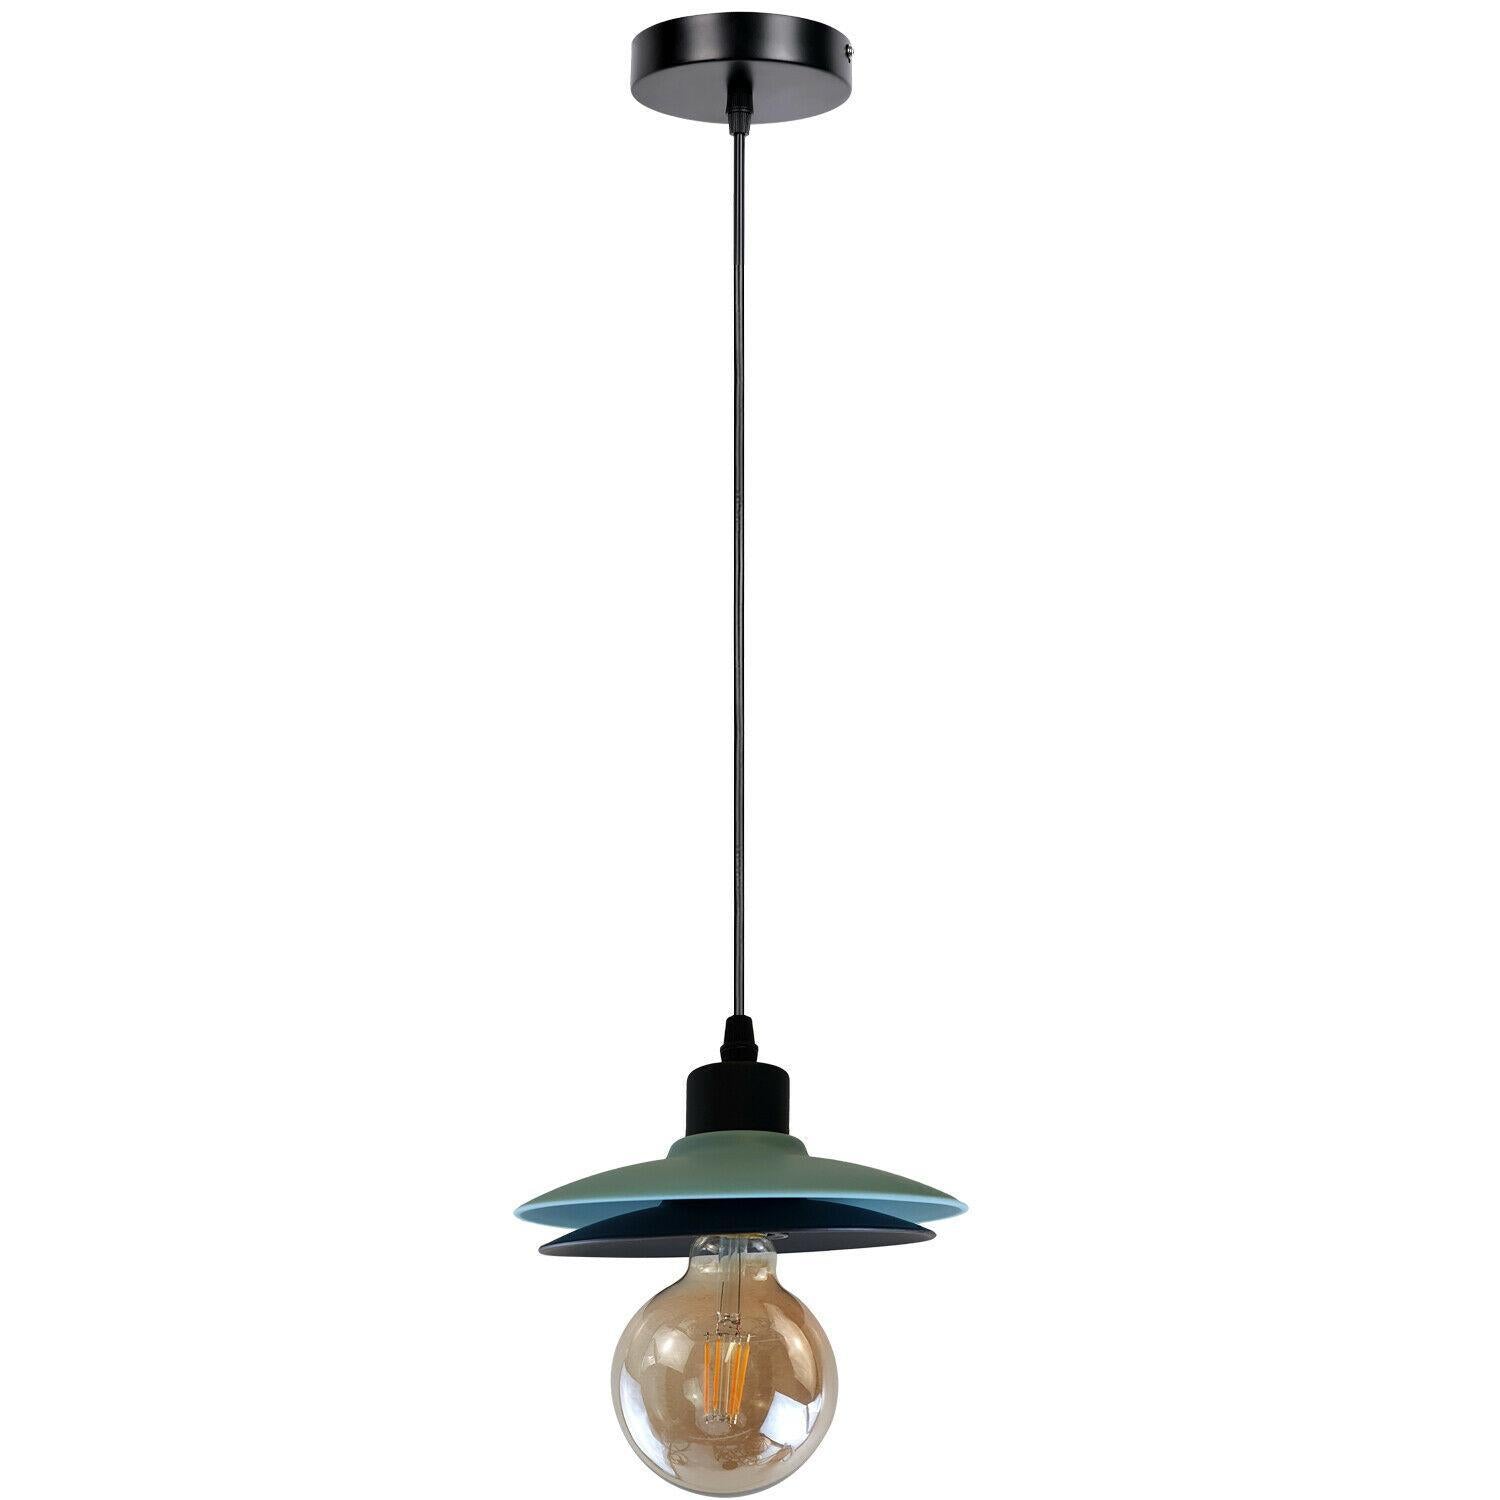 Double shade 2Pack Black And Blue Shade Ceiling Pendant Light